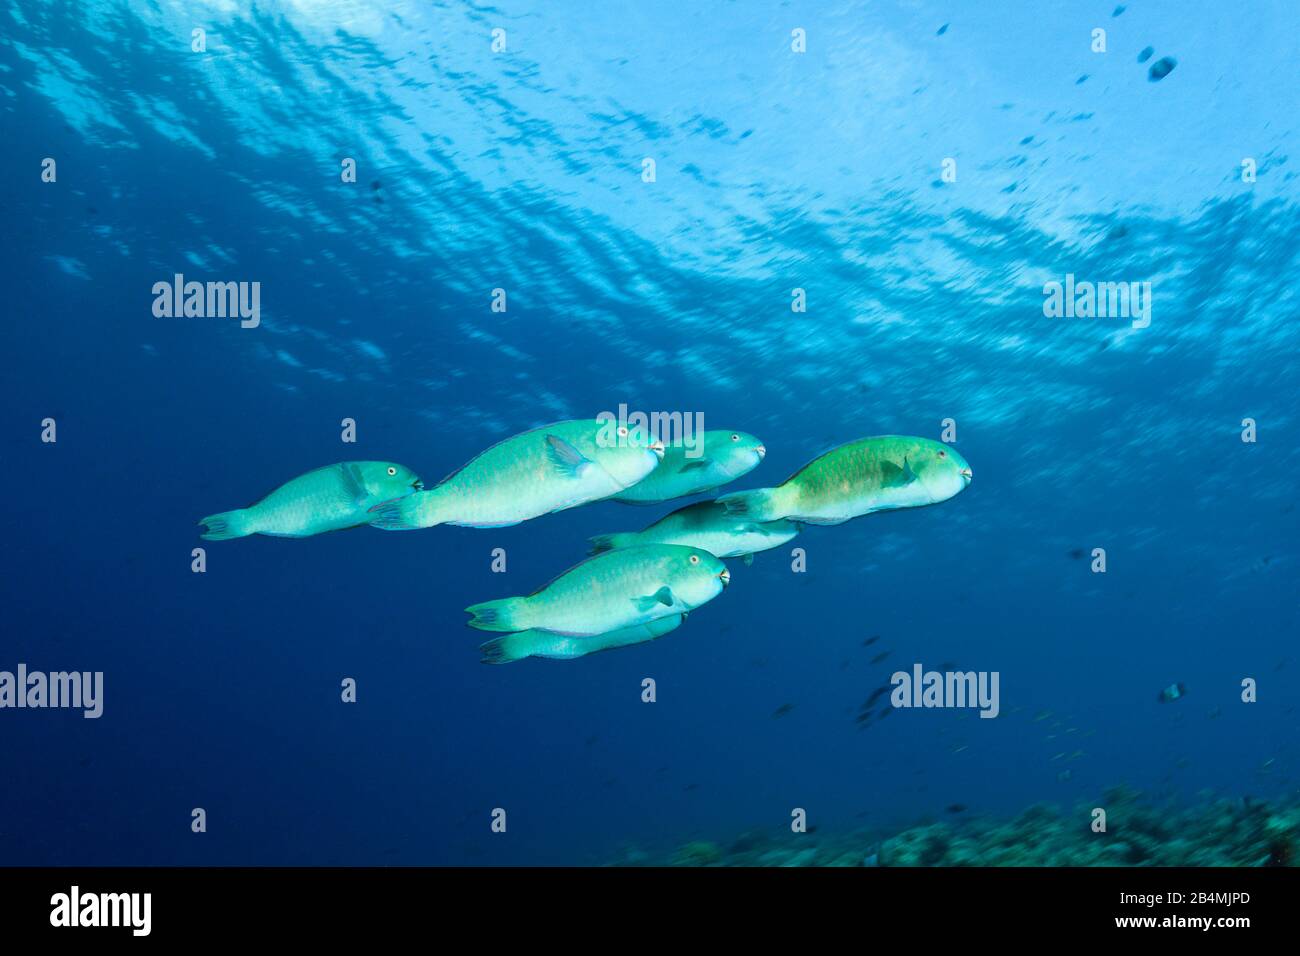 Bluebarred Parrotfish, Scarus ghobban, South Male Atoll, Indian Ocean, Maldives Stock Photo